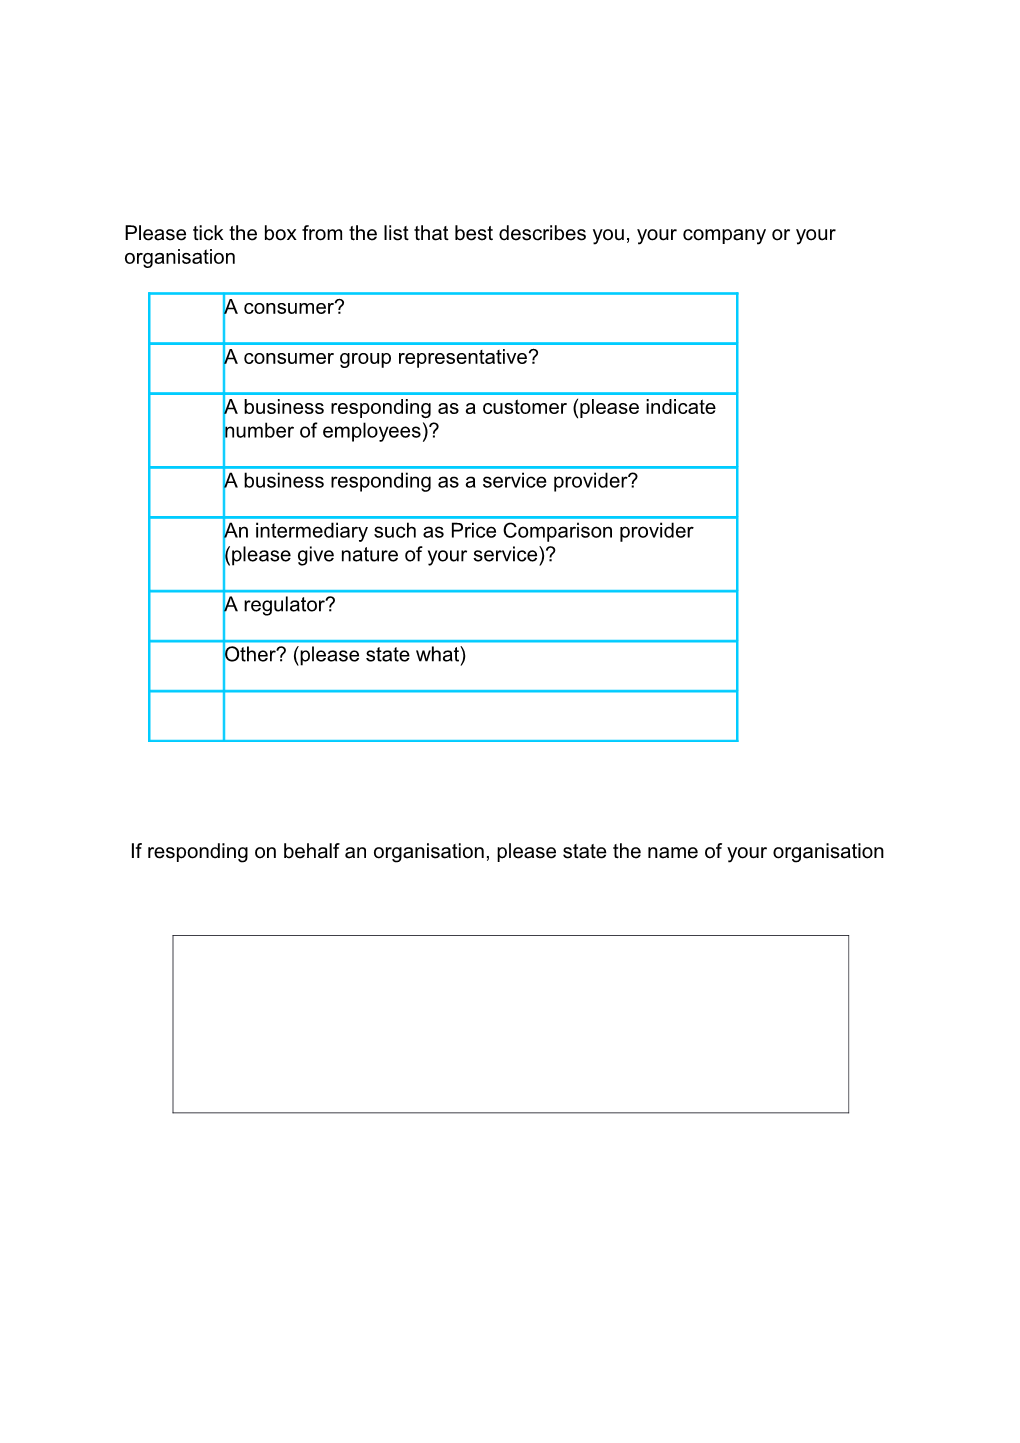 Response Form - Call for Evidence: Improving the Consumer Landscape & Switching